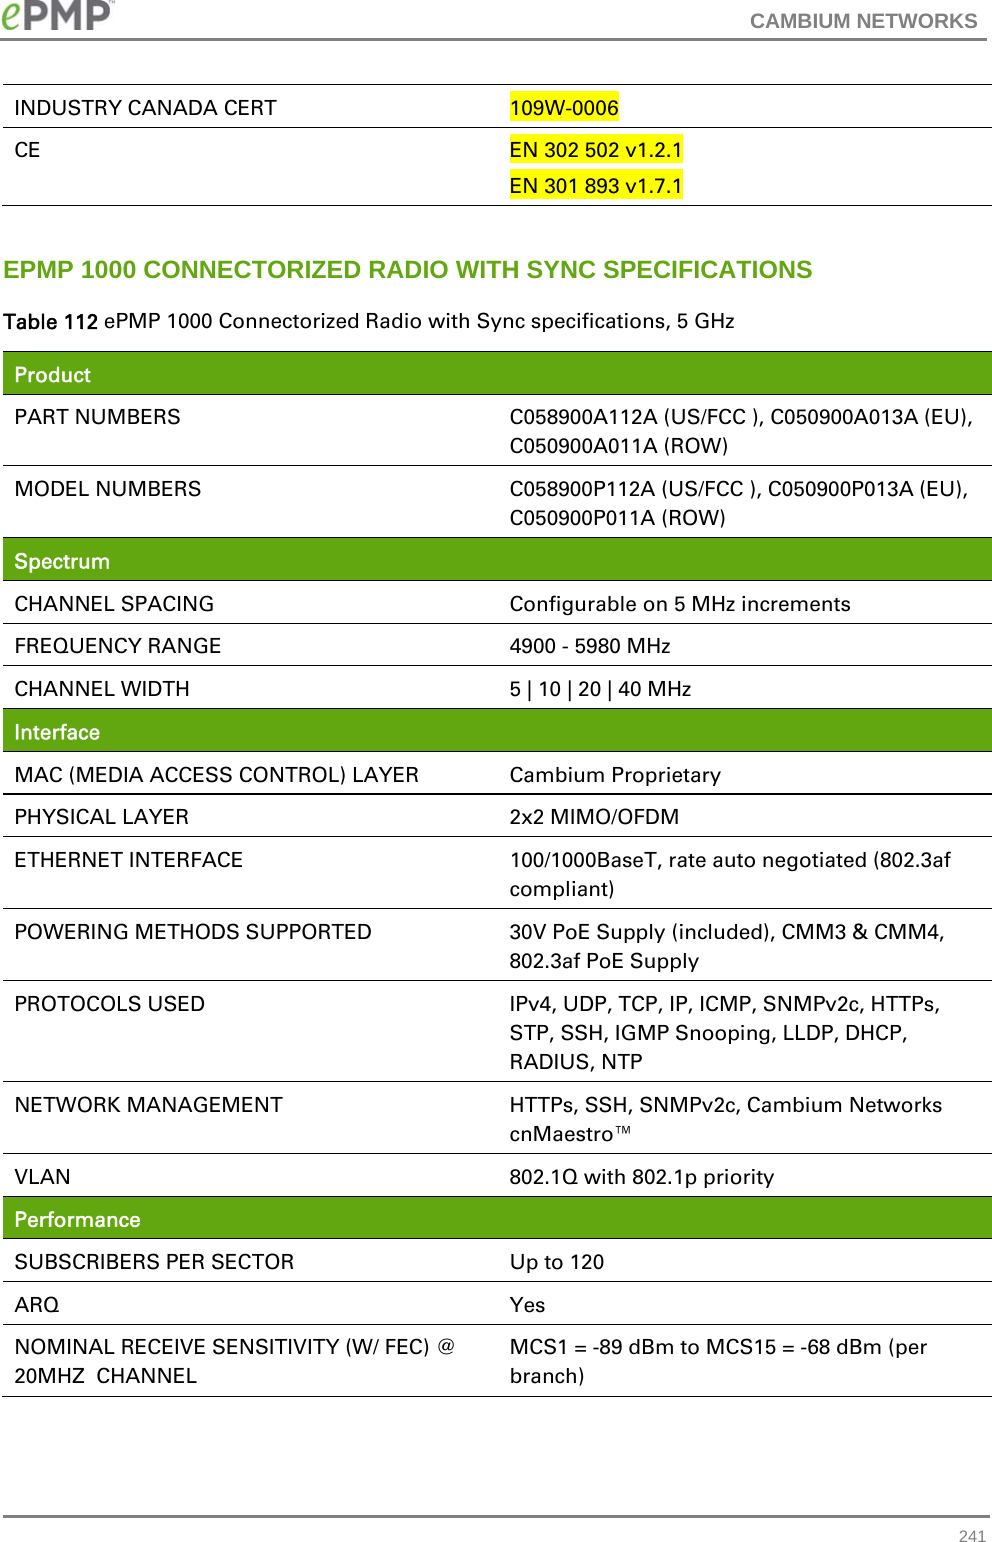 CAMBIUM NETWORKS   241INDUSTRY CANADA CERT  109W-0006 CE  EN 302 502 v1.2.1 EN 301 893 v1.7.1  EPMP 1000 CONNECTORIZED RADIO WITH SYNC SPECIFICATIONS Table 112 ePMP 1000 Connectorized Radio with Sync specifications, 5 GHz Product  PART NUMBERS  C058900A112A (US/FCC ), C050900A013A (EU), C050900A011A (ROW) MODEL NUMBERS  C058900P112A (US/FCC ), C050900P013A (EU), C050900P011A (ROW) Spectrum  CHANNEL SPACING  Configurable on 5 MHz increments FREQUENCY RANGE  4900 - 5980 MHz CHANNEL WIDTH  5 | 10 | 20 | 40 MHz   Interface  MAC (MEDIA ACCESS CONTROL) LAYER  Cambium Proprietary PHYSICAL LAYER  2x2 MIMO/OFDM ETHERNET INTERFACE  100/1000BaseT, rate auto negotiated (802.3af compliant) POWERING METHODS SUPPORTED  30V PoE Supply (included), CMM3 &amp; CMM4, 802.3af PoE Supply PROTOCOLS USED  IPv4, UDP, TCP, IP, ICMP, SNMPv2c, HTTPs, STP, SSH, IGMP Snooping, LLDP, DHCP, RADIUS, NTP  NETWORK MANAGEMENT  HTTPs, SSH, SNMPv2c, Cambium Networks cnMaestro™ VLAN  802.1Q with 802.1p priority Performance  SUBSCRIBERS PER SECTOR  Up to 120 ARQ Yes NOMINAL RECEIVE SENSITIVITY (W/ FEC) @ 20MHZ  CHANNEL MCS1 = -89 dBm to MCS15 = -68 dBm (per branch) 